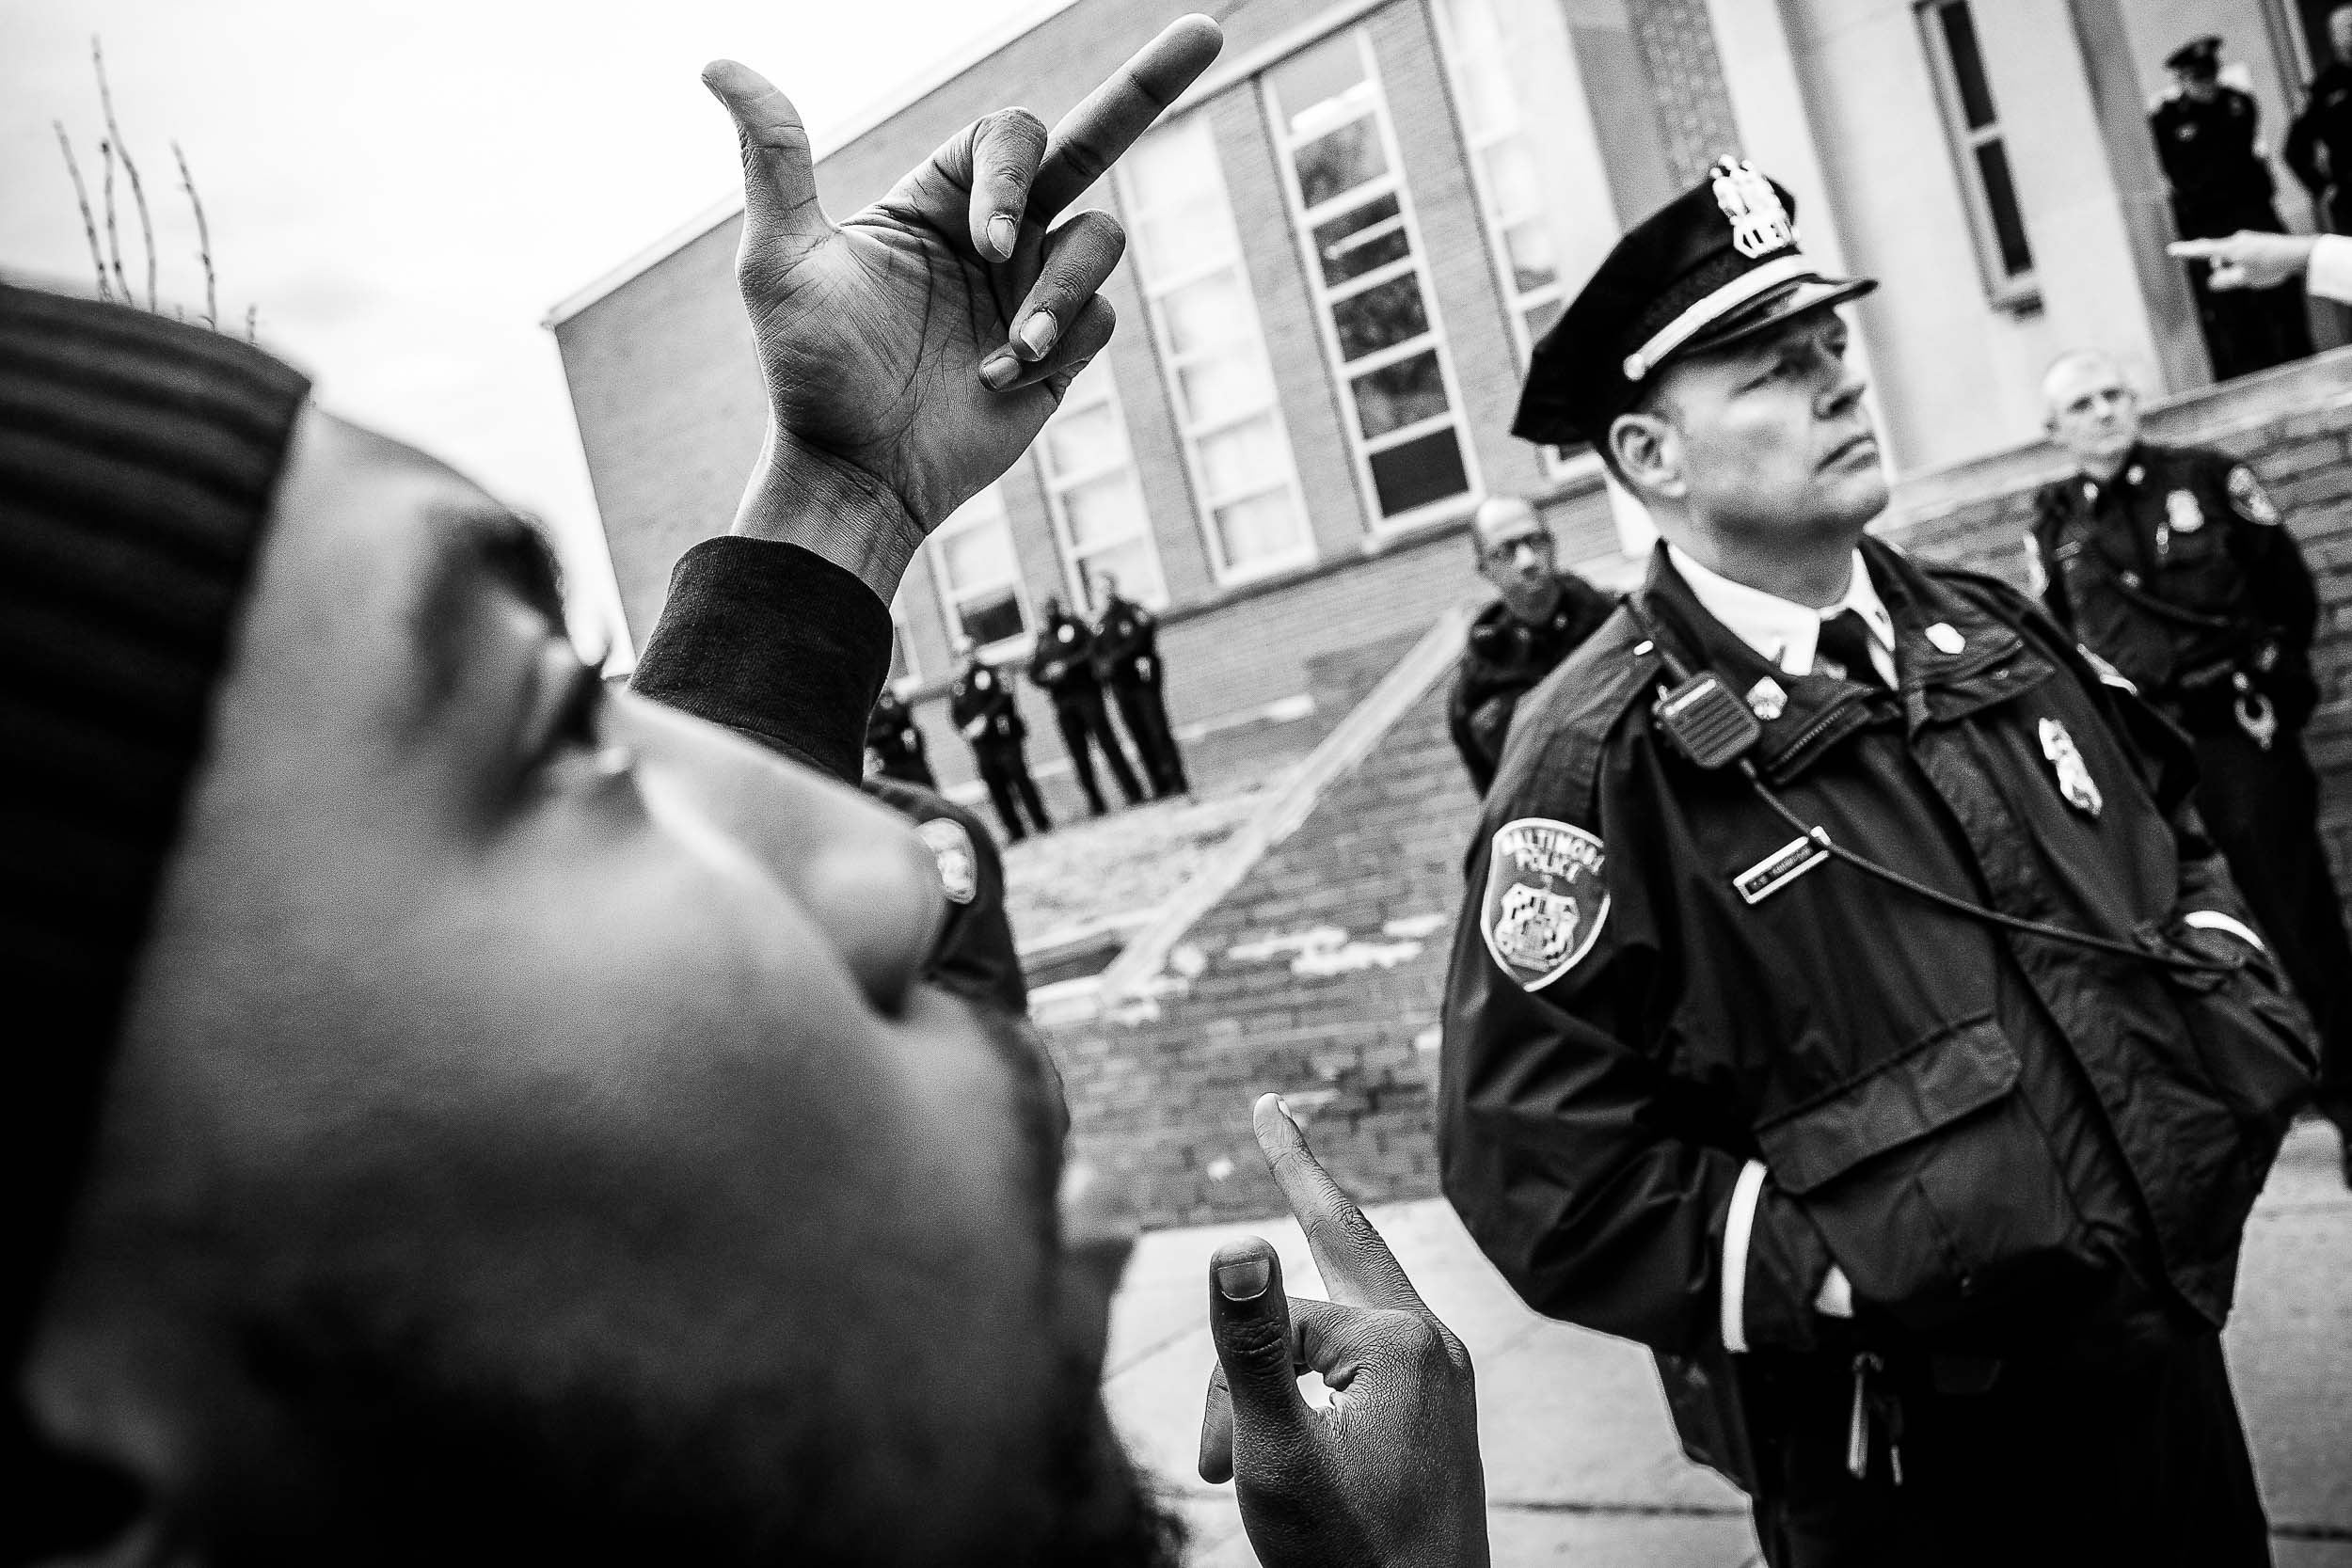 NEW YORK TIMES PHOTOJOURNALIST REPORTAGE PHOTOGRAPHER IN BALTIMORE WASHINGTON DC FREDDIE GRAY BALTIMORE UPRISING PROTEST PHOTOGRAPHY